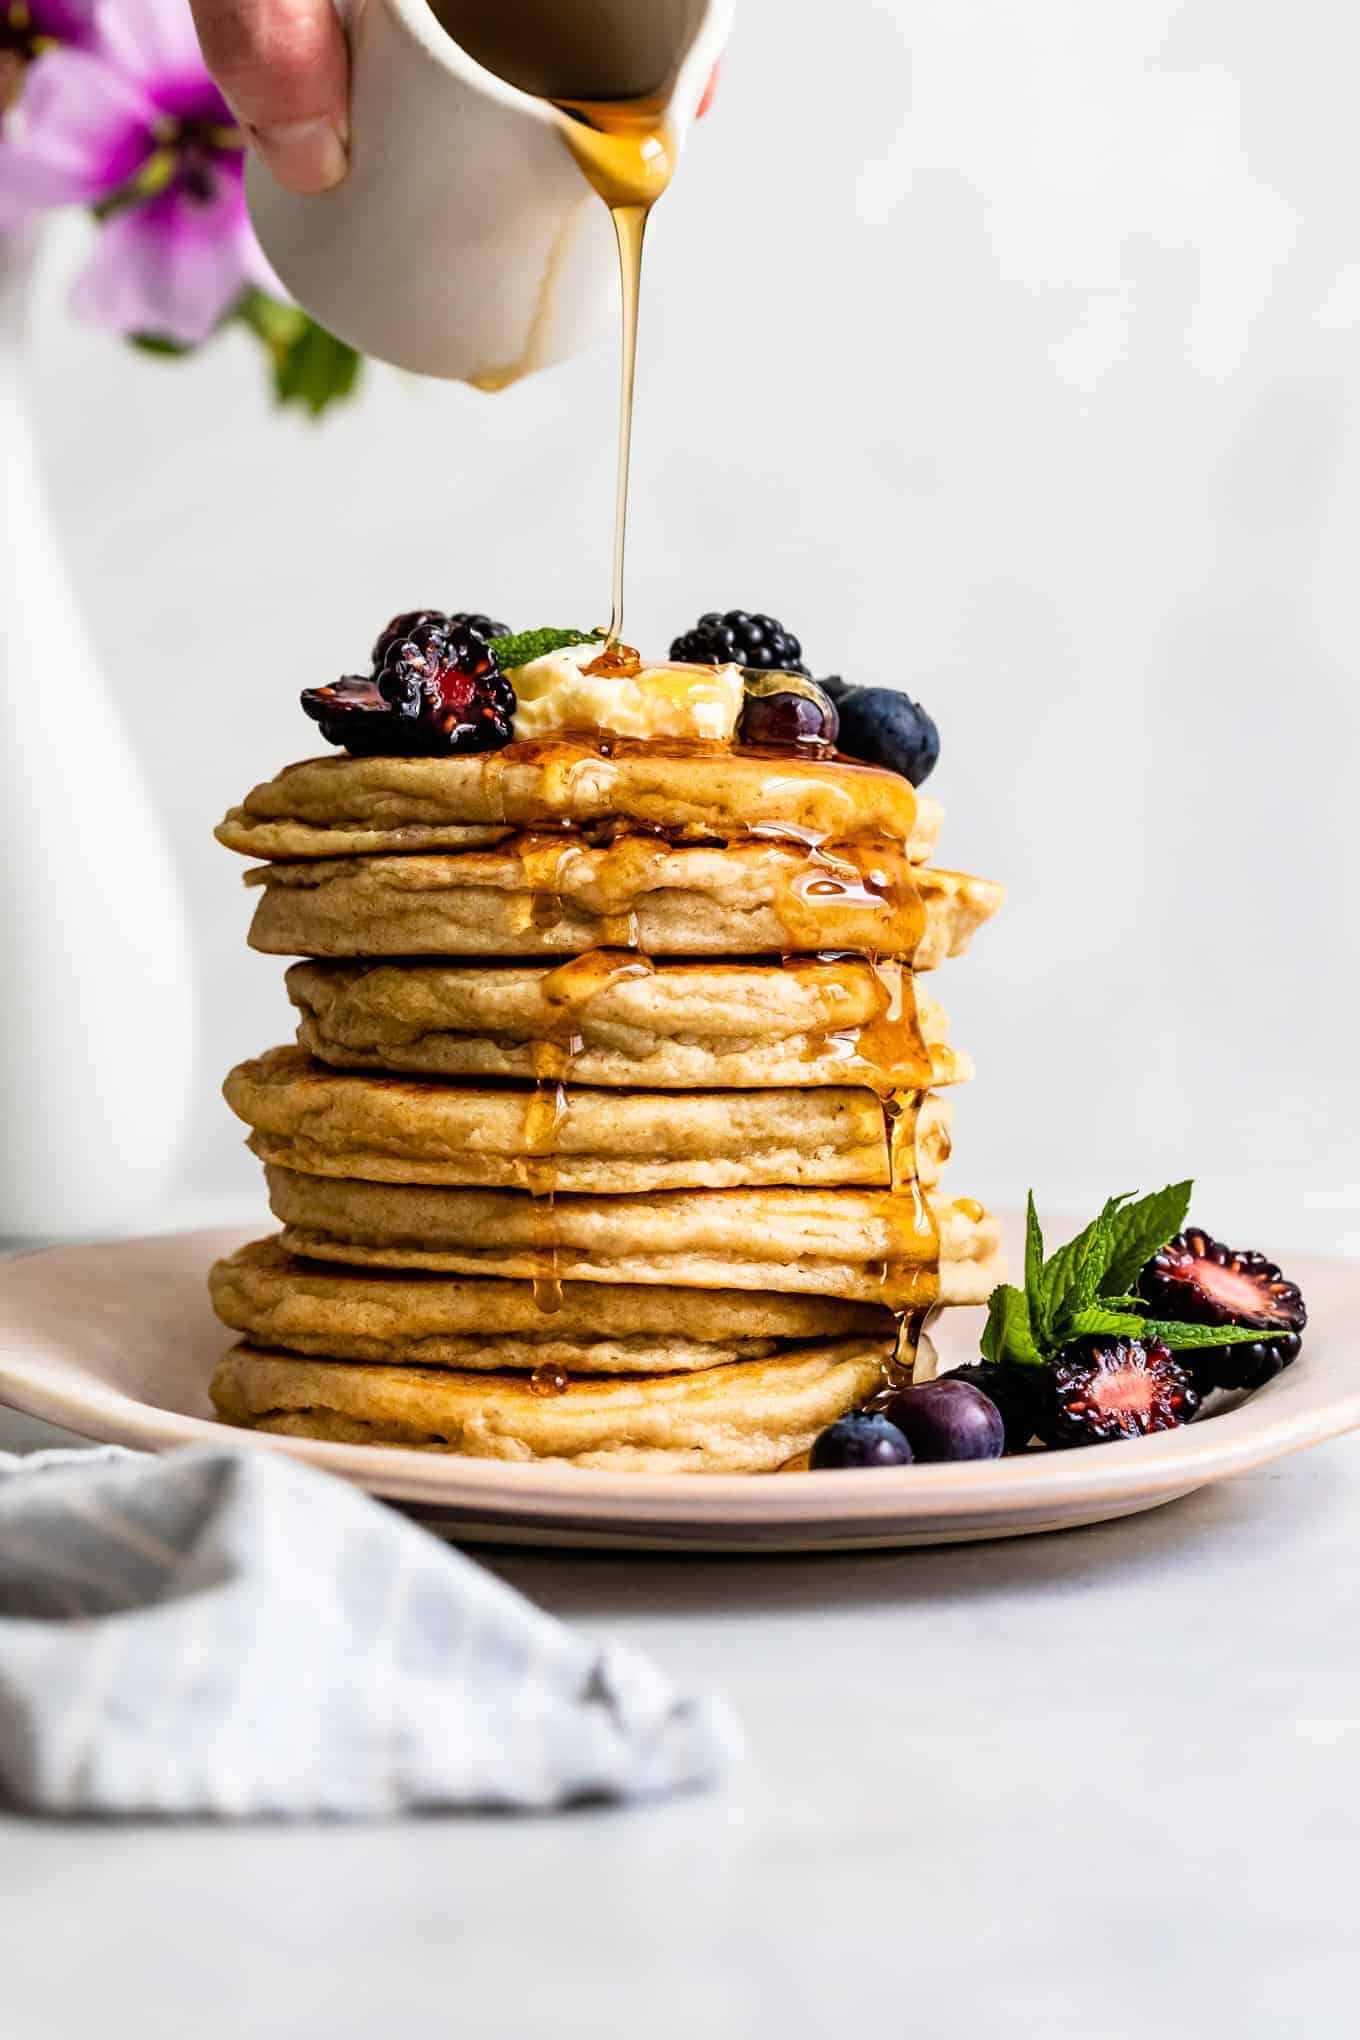 Syrup drizzling on the best gluten-free pancakes recipe